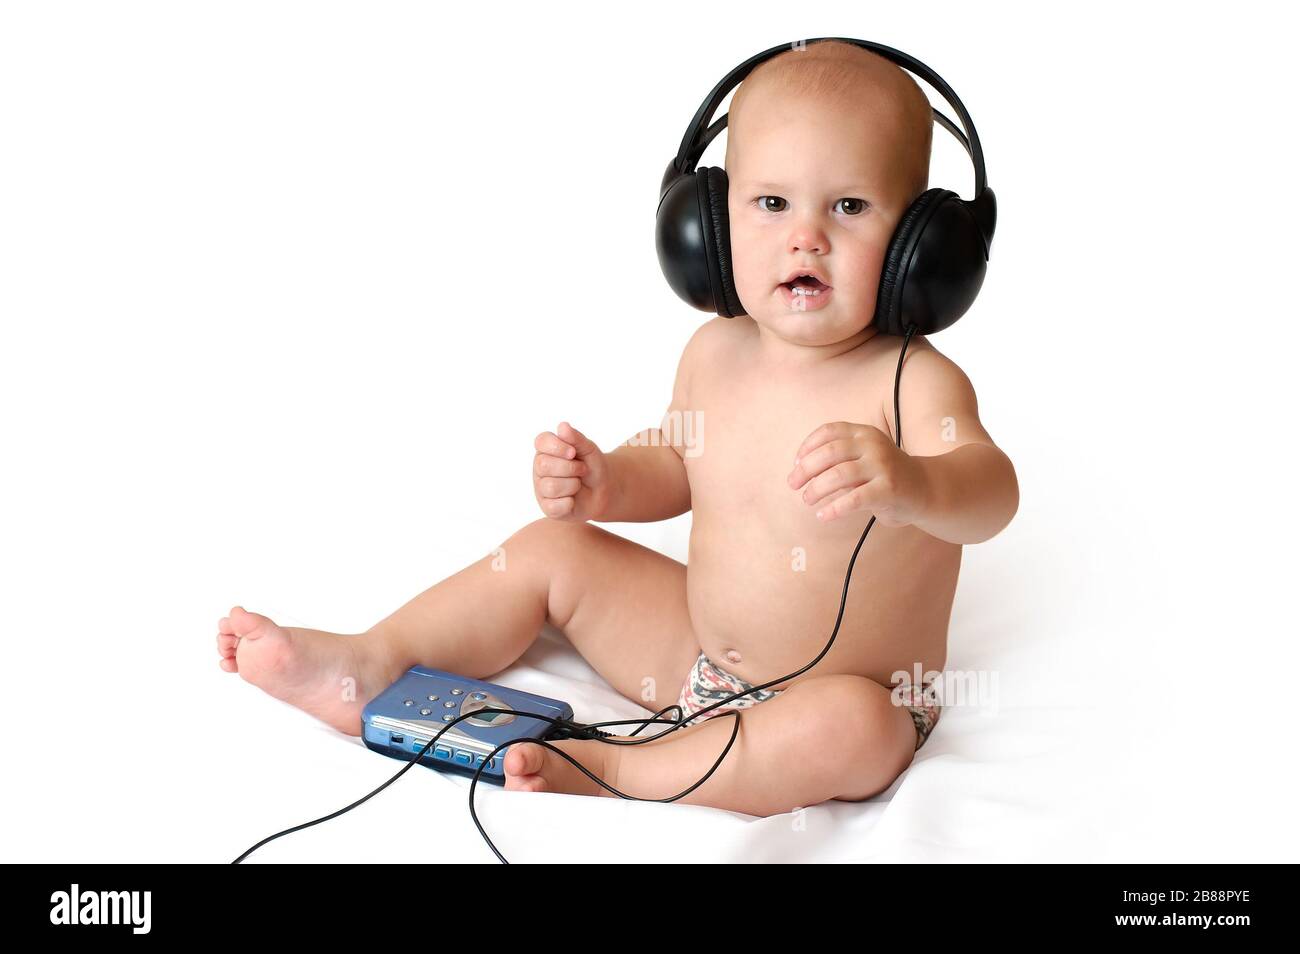 Little one year old boy listens to walkman music in big headphones and smiles on an isolated white background Stock Photo